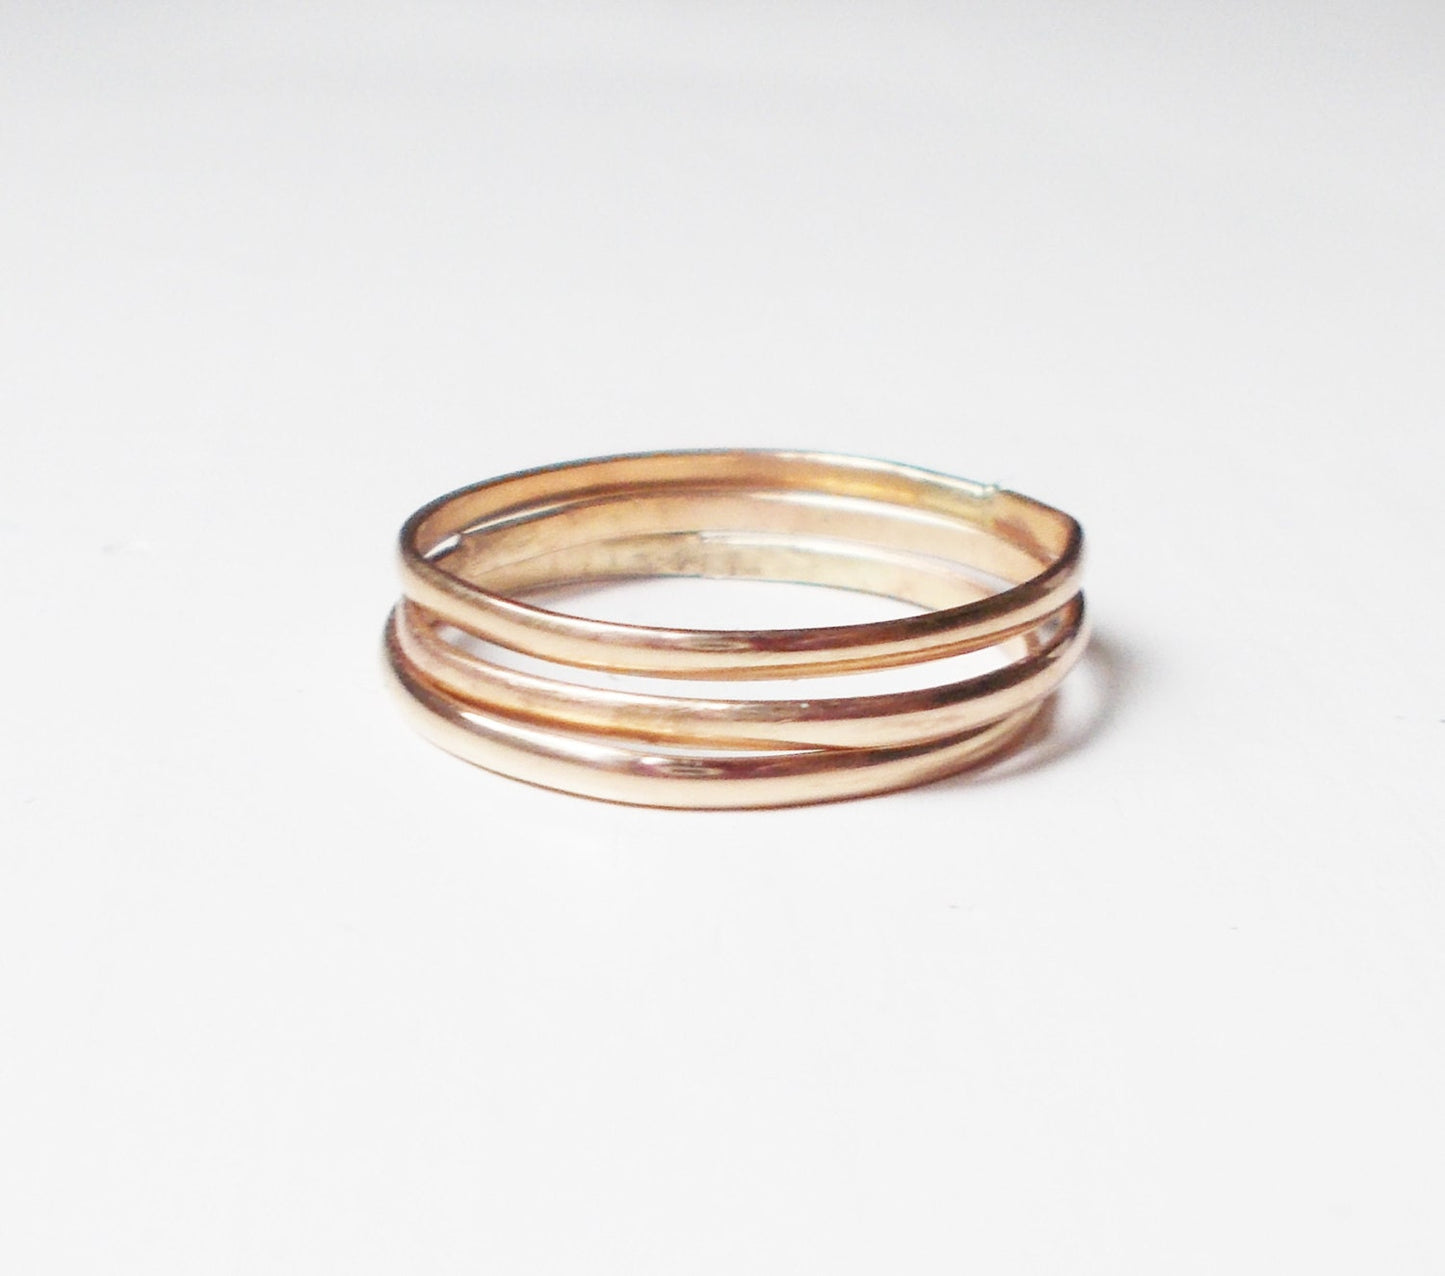 Set of Three 14K Gold Filled Knuckle Rings - Stackable